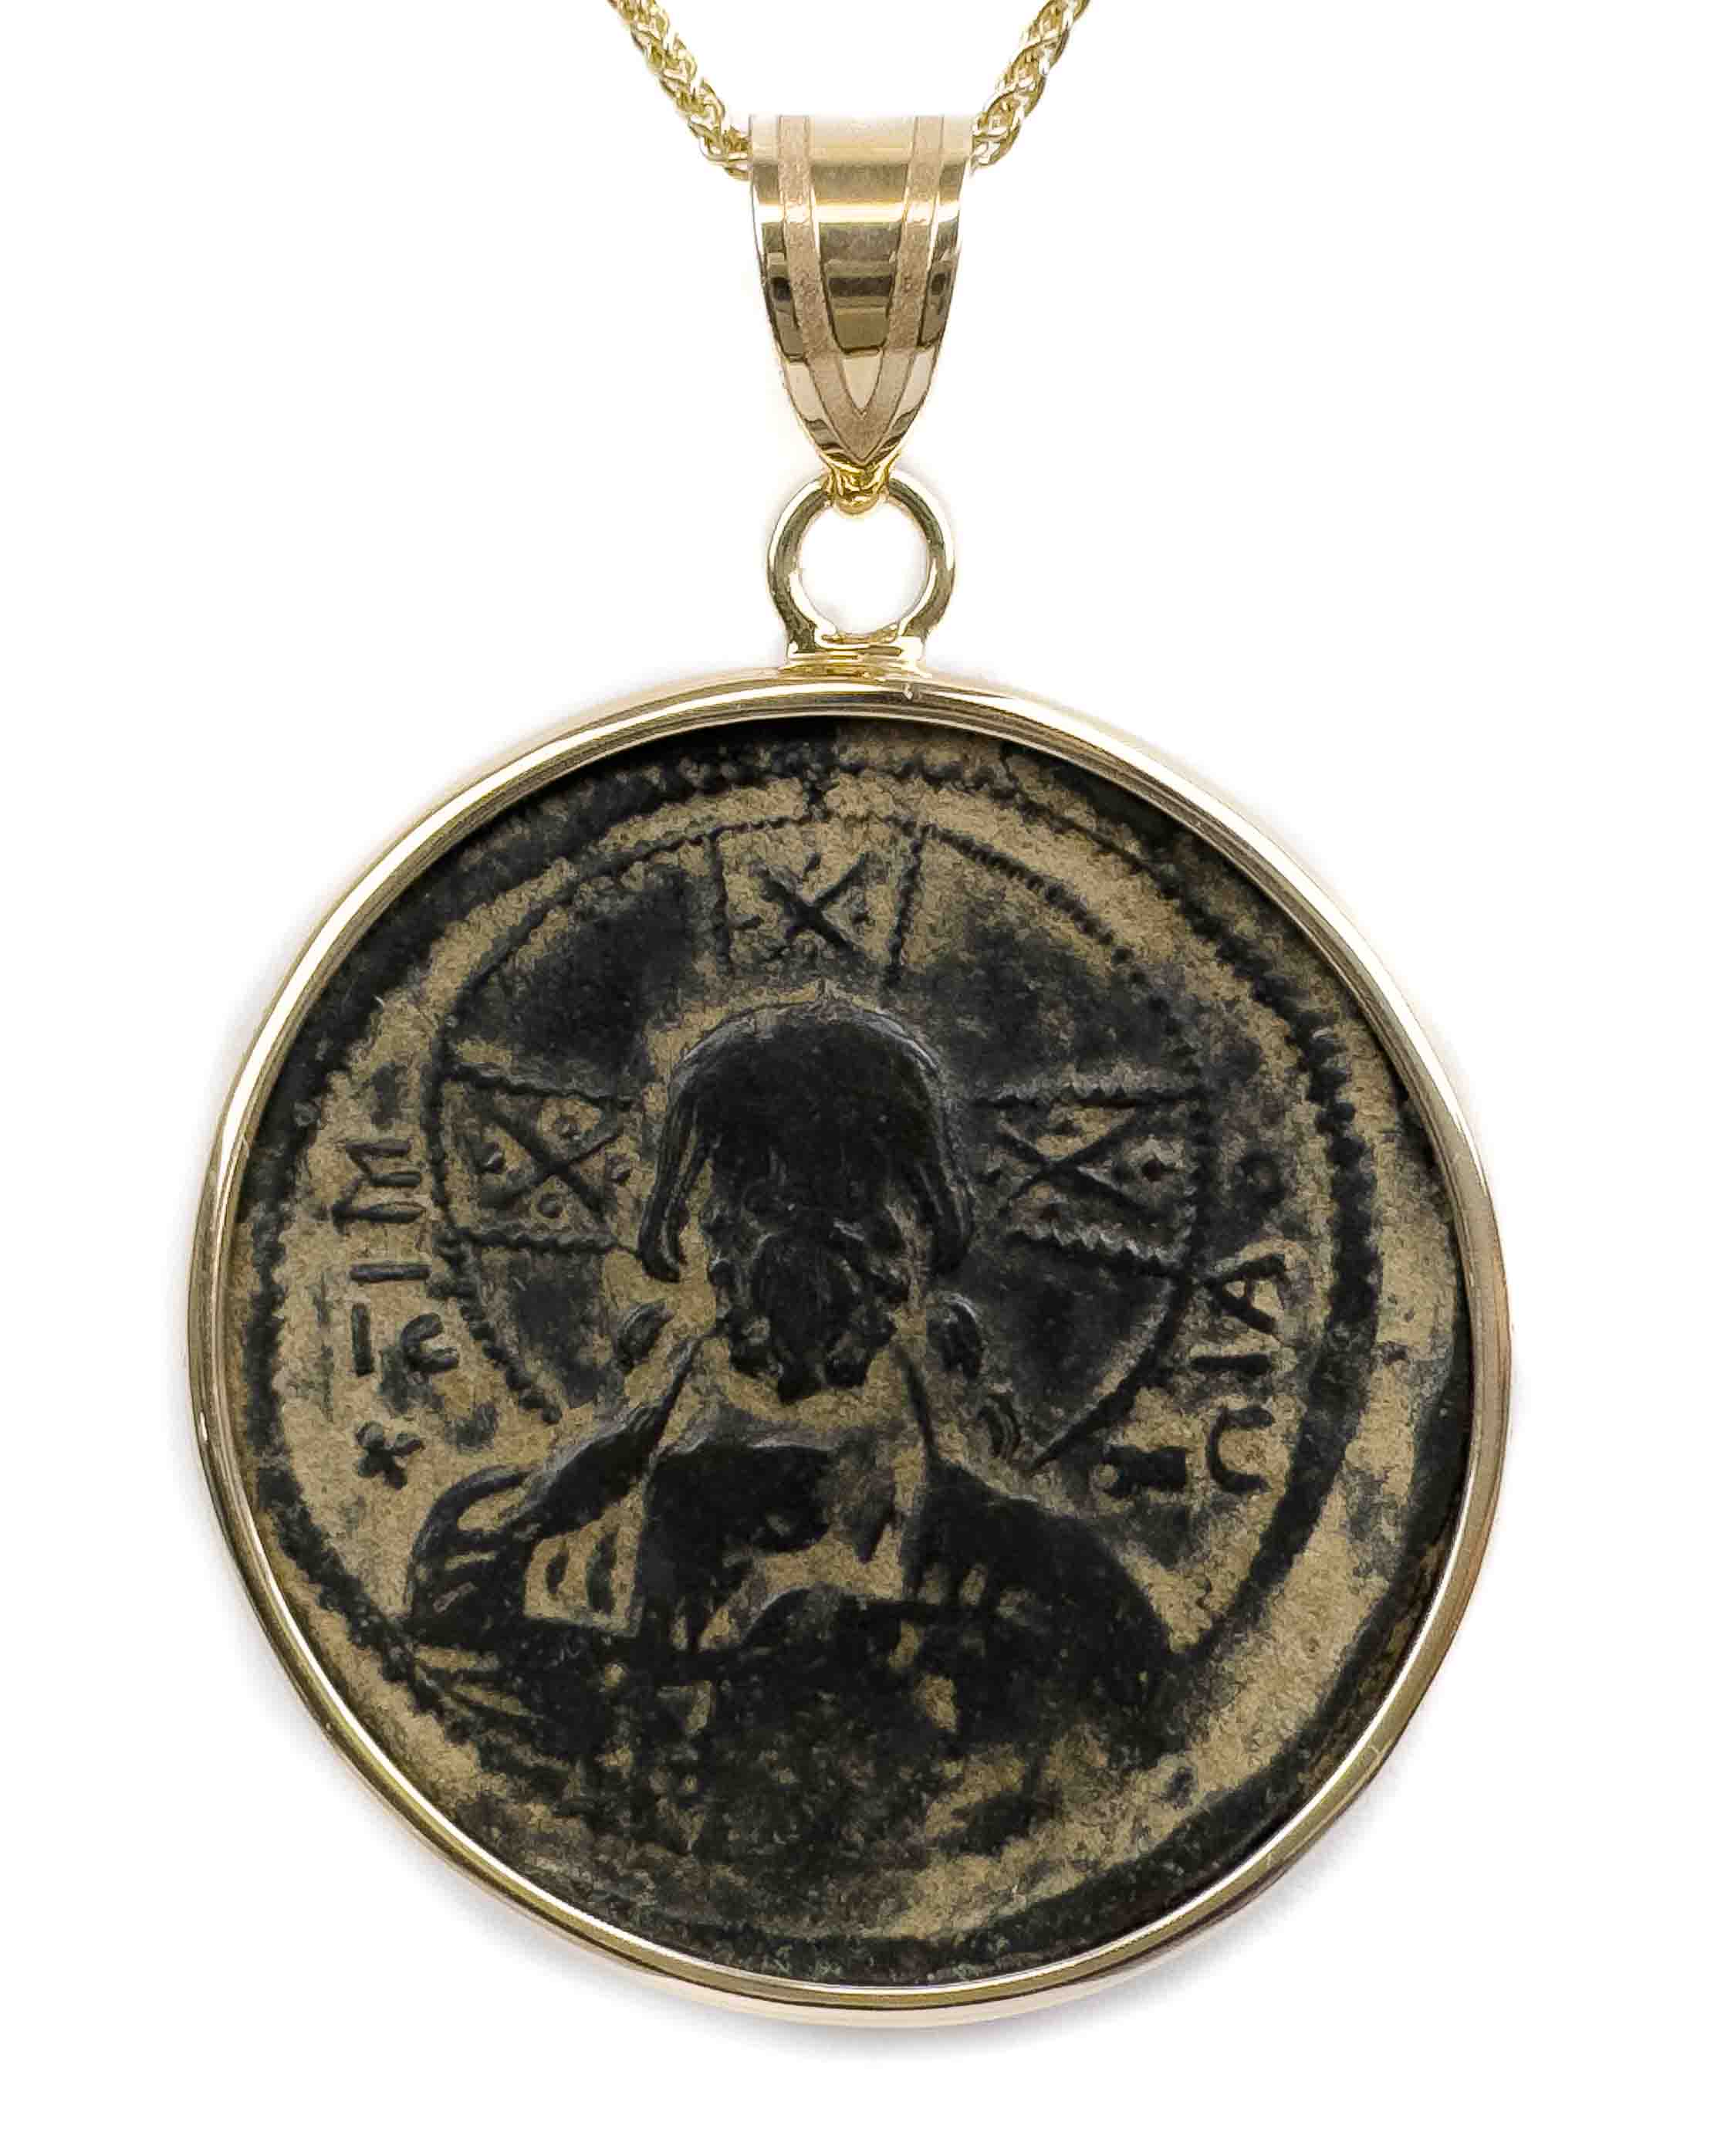 14k Genuine Ancient Byzantine Coin Pendant Necklace (Christ, King of Kings; 1020-1028 A.D. )